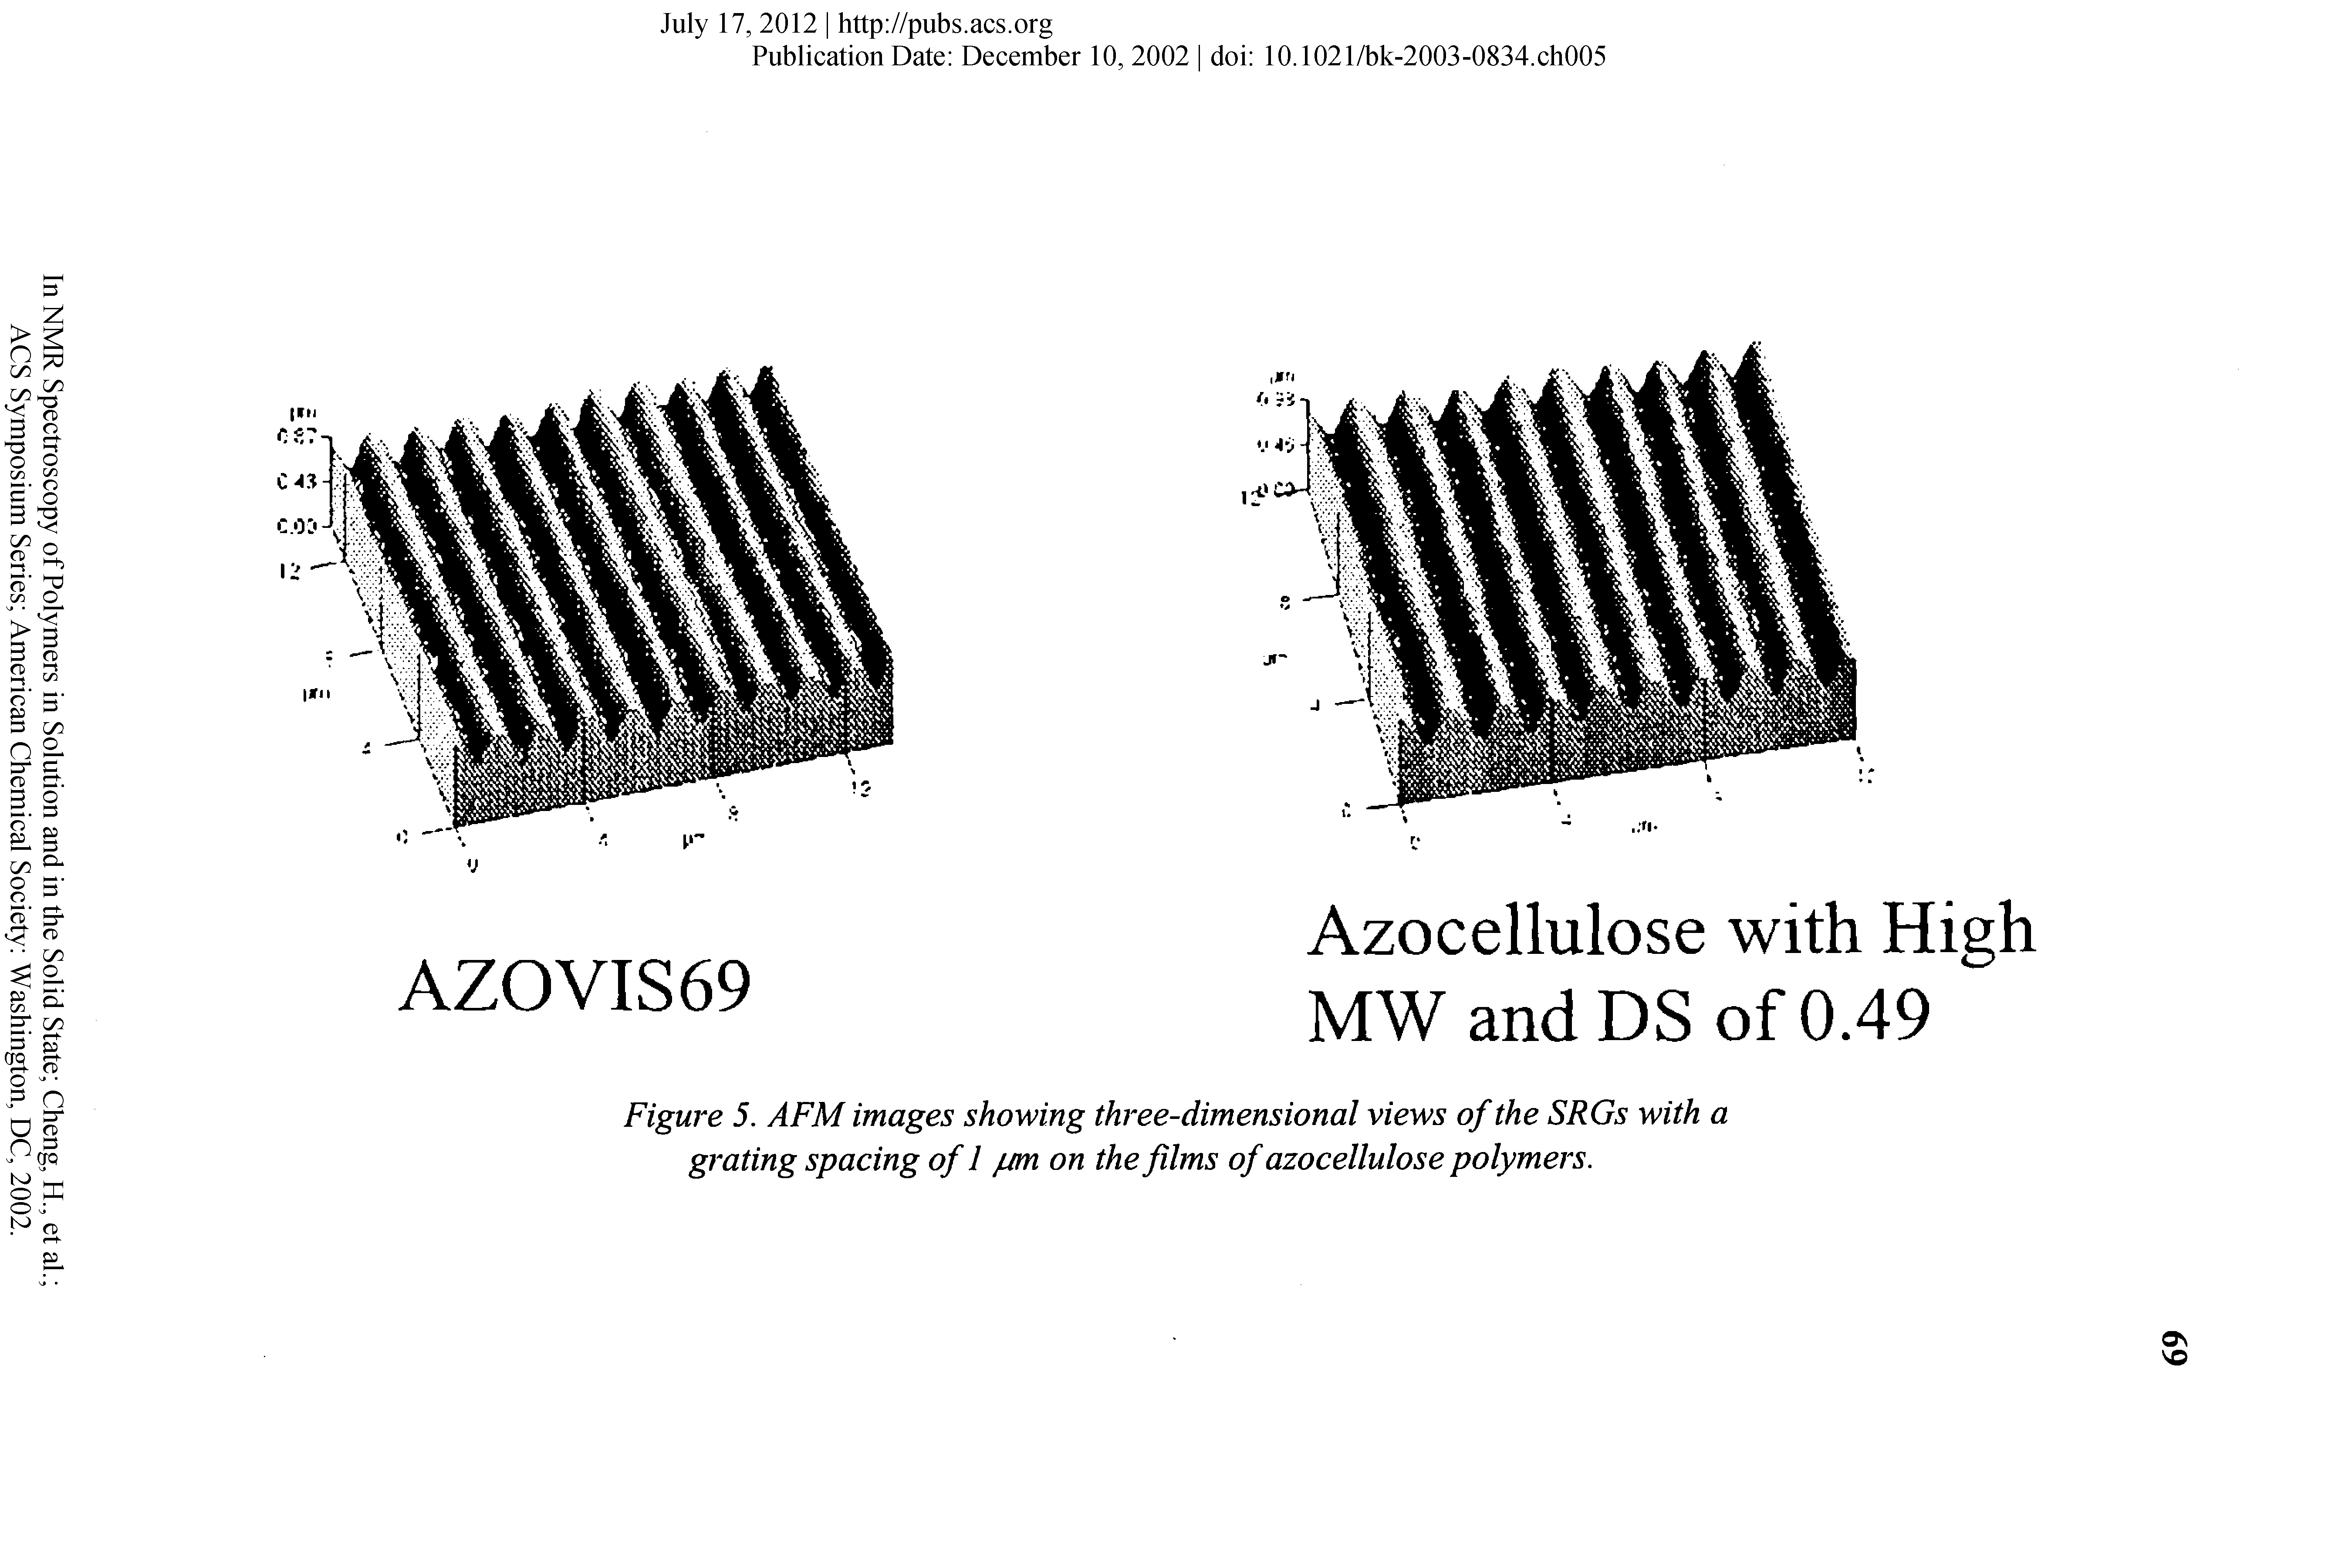 Figure 5. AFM images showing three-dimensional views of the SRGs with a grating spacing of 1 /m on the films of azocellulose polymers.